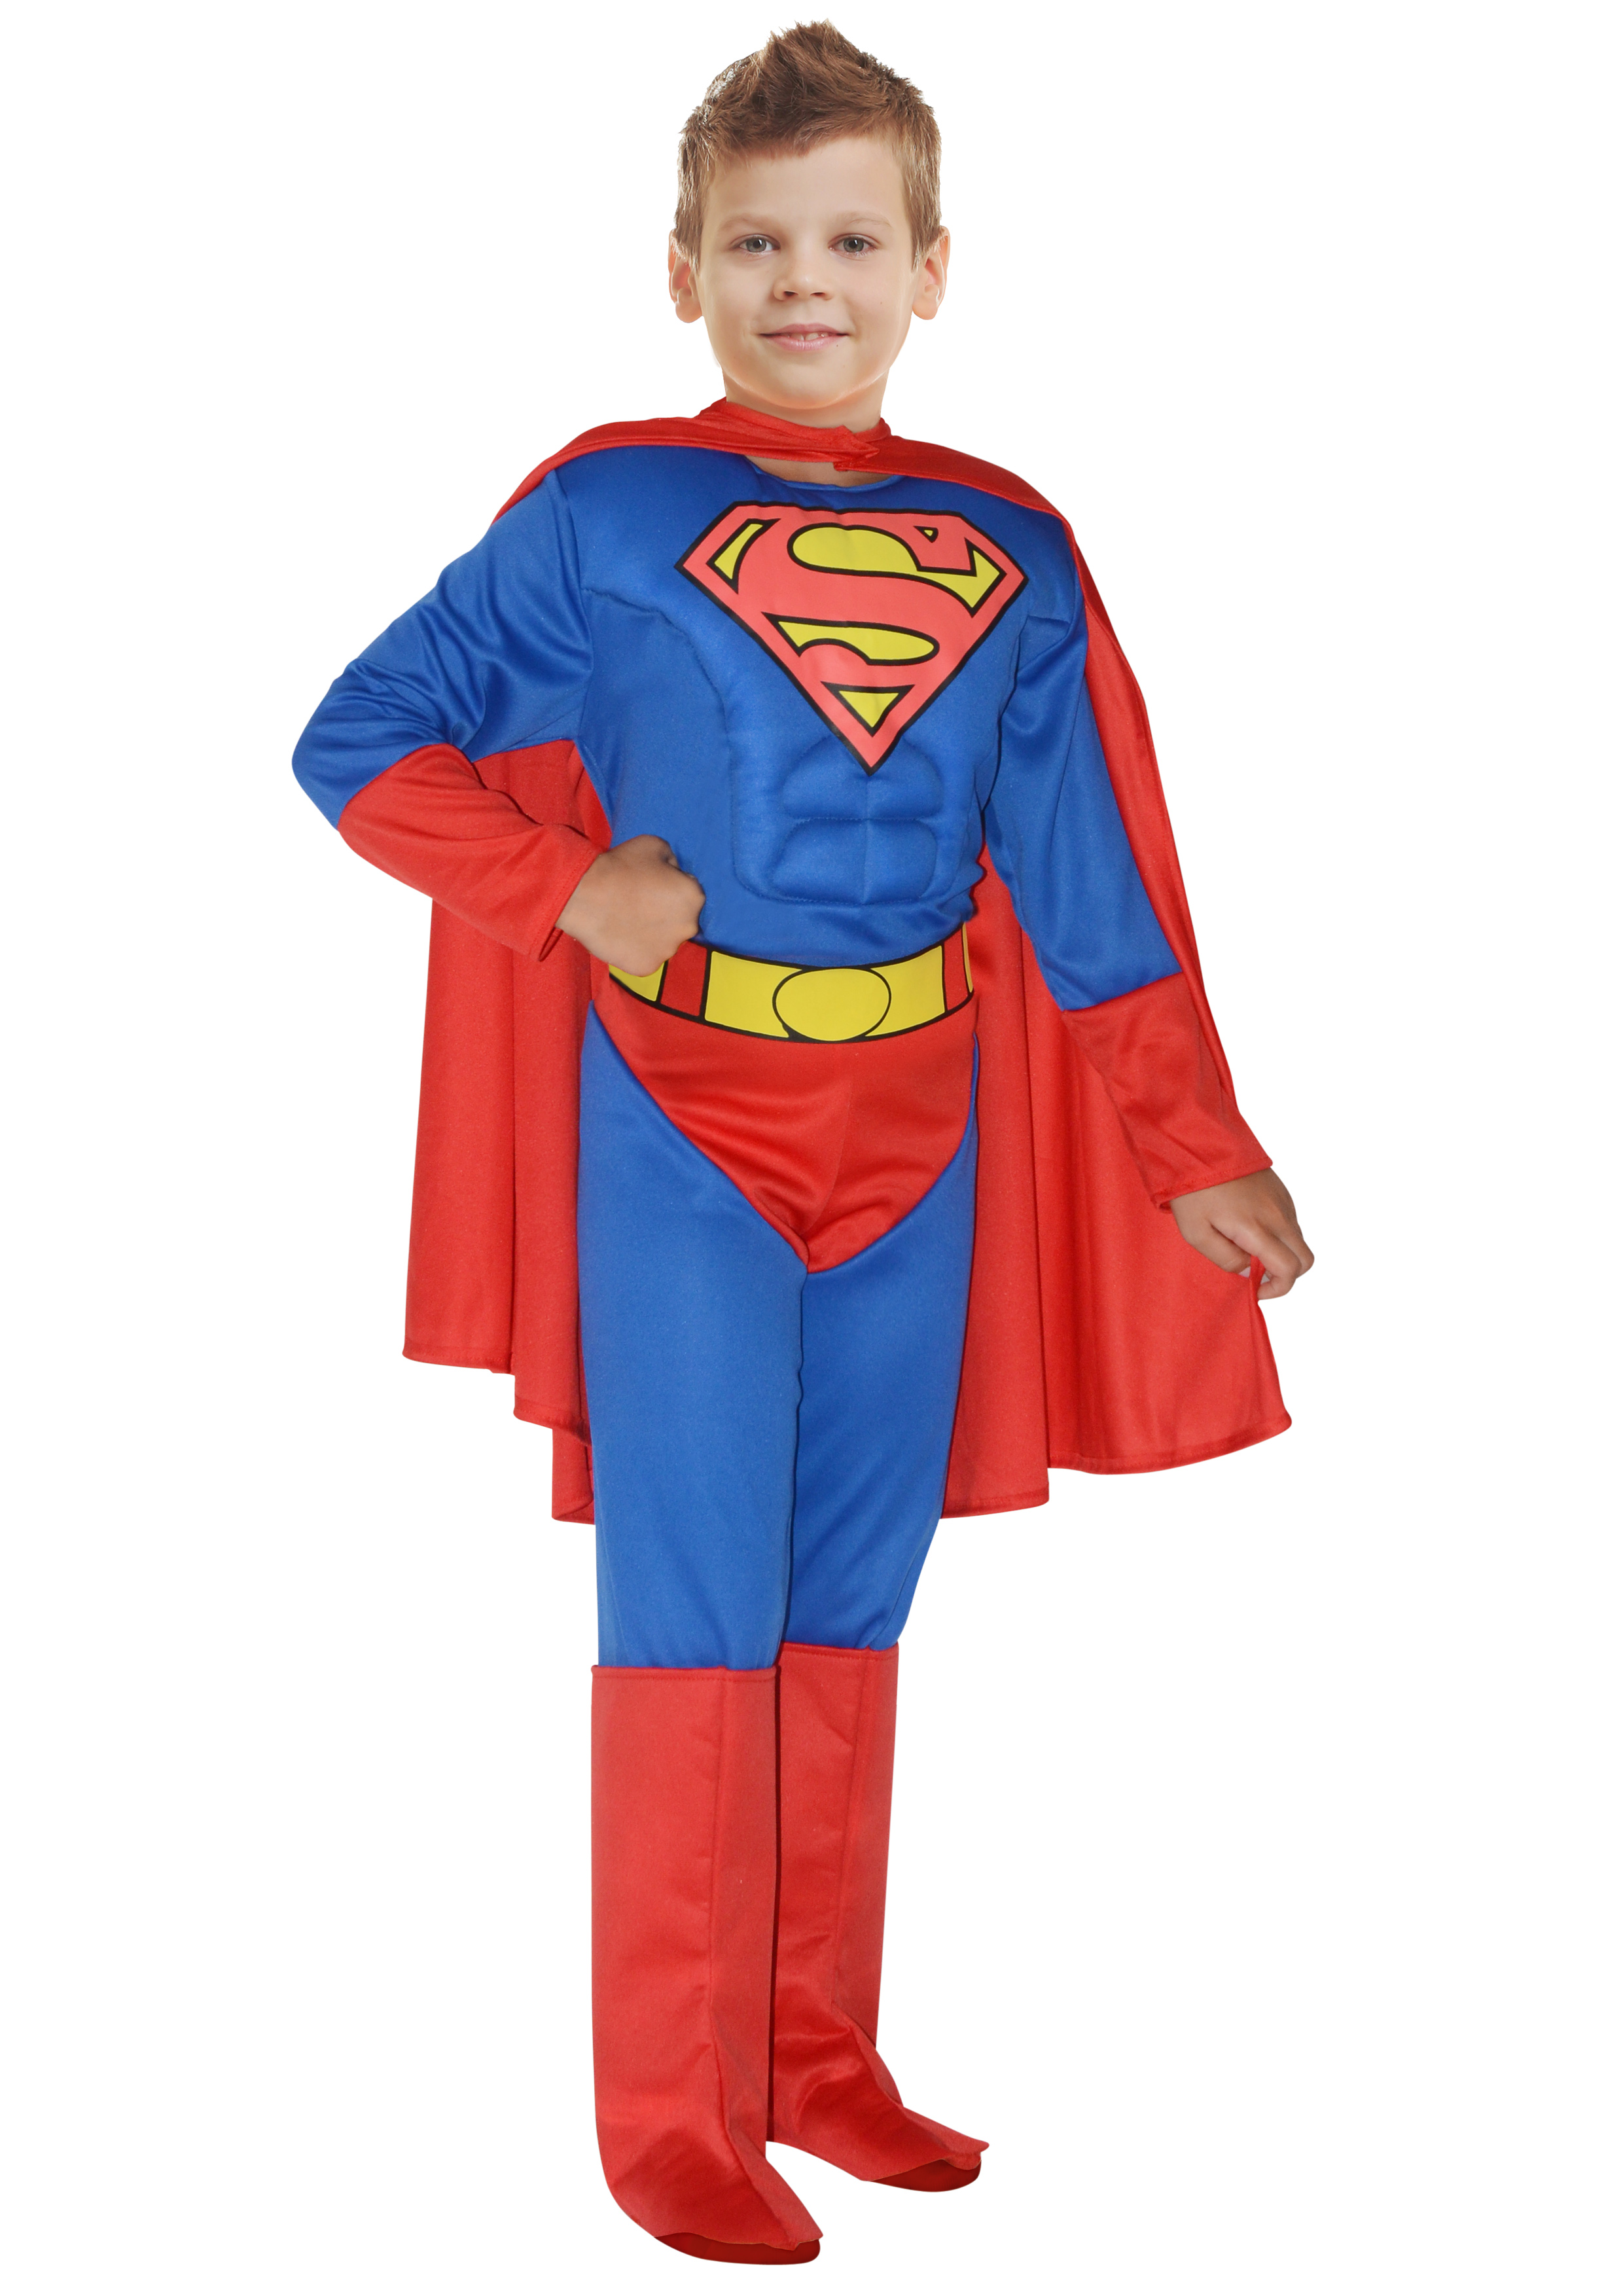 Superman Muscles for Kids (8-10 years)